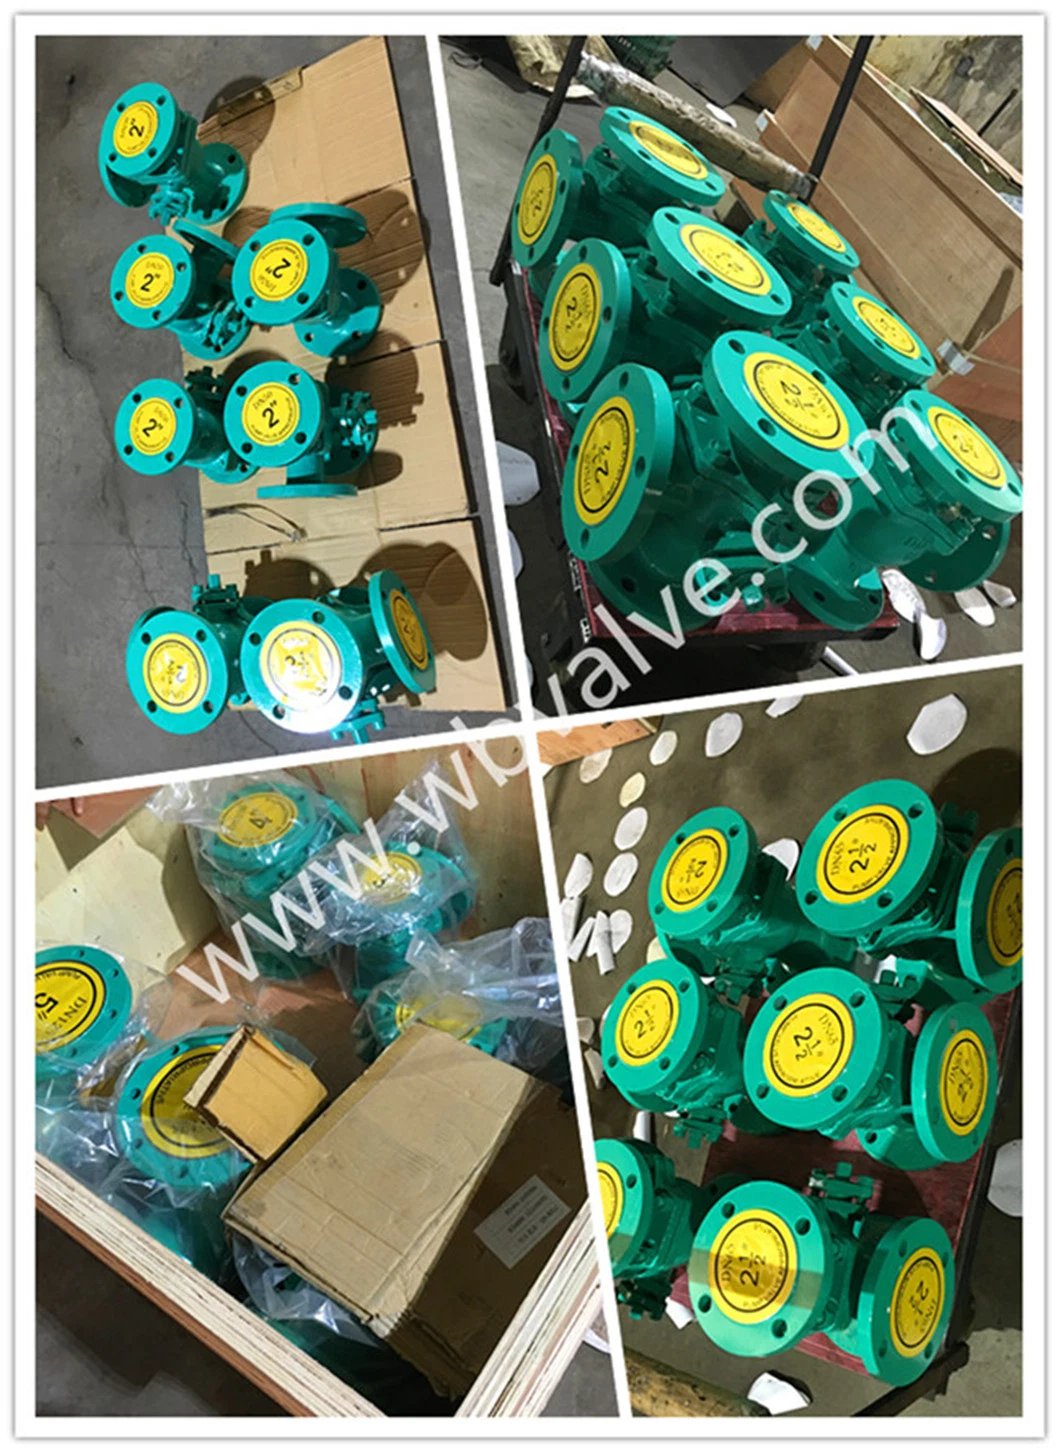 Gear Operated Double Flanged Offset Eccentric Butterfly Valve DN350